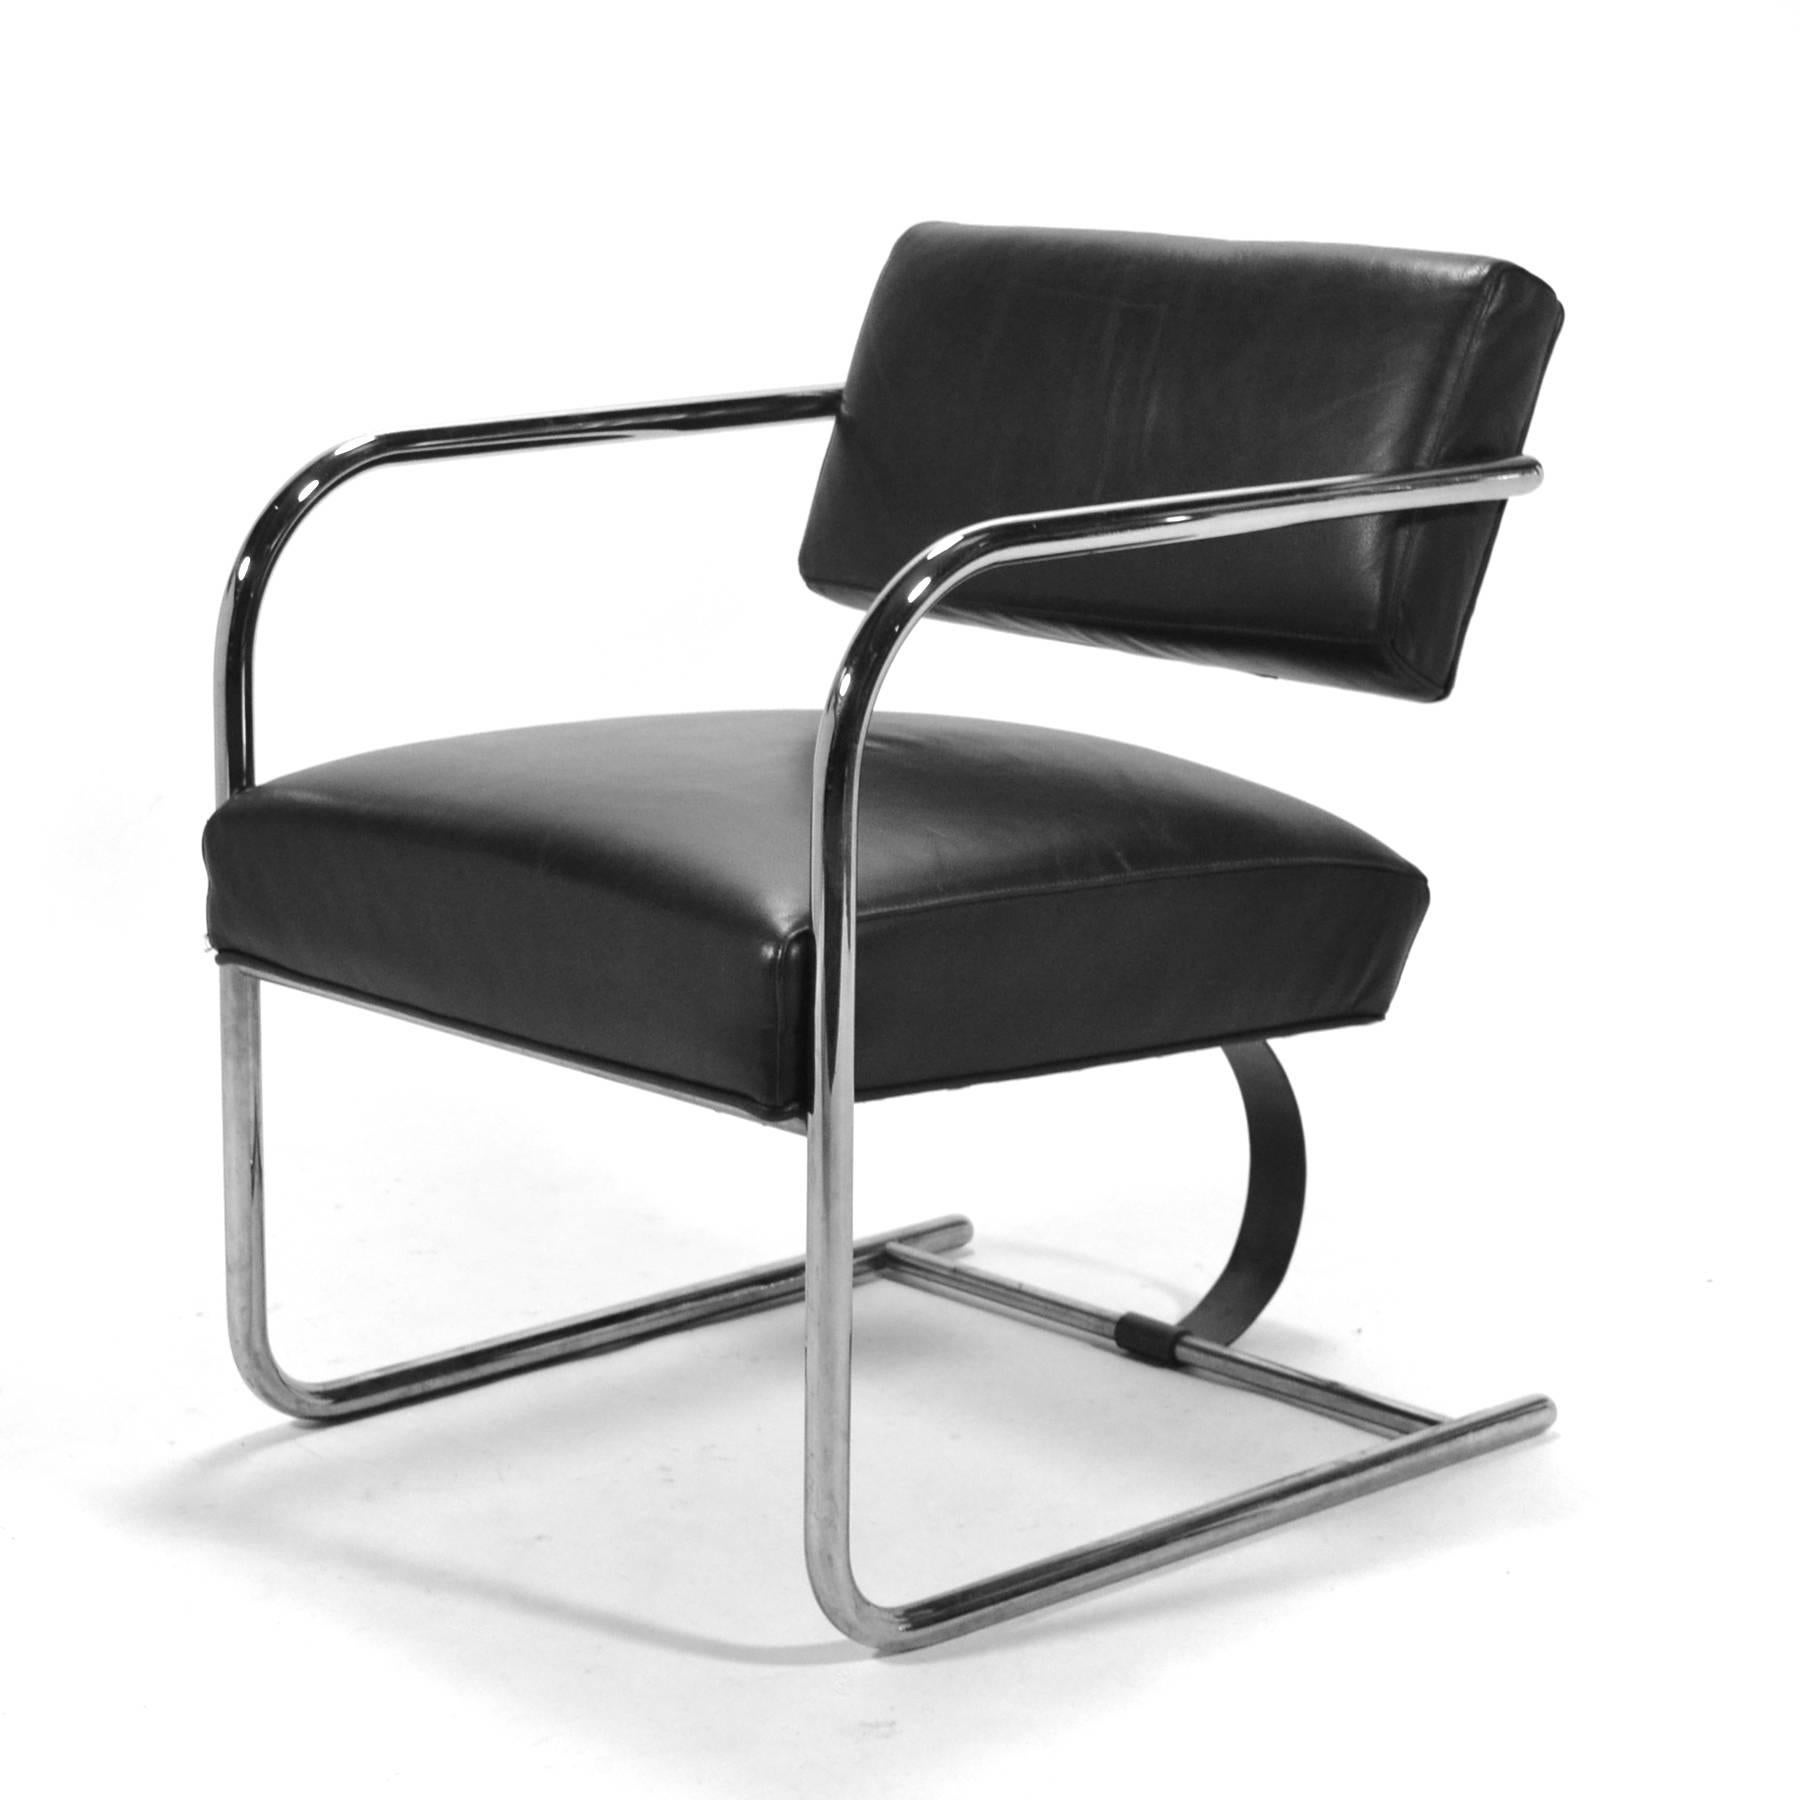 This 1936 design by important modernist architect Richard Neutra was designed to furnish the homes he designed and was used in several important commissions. This example from a later re-edition is upholstered in black leather and in in very good